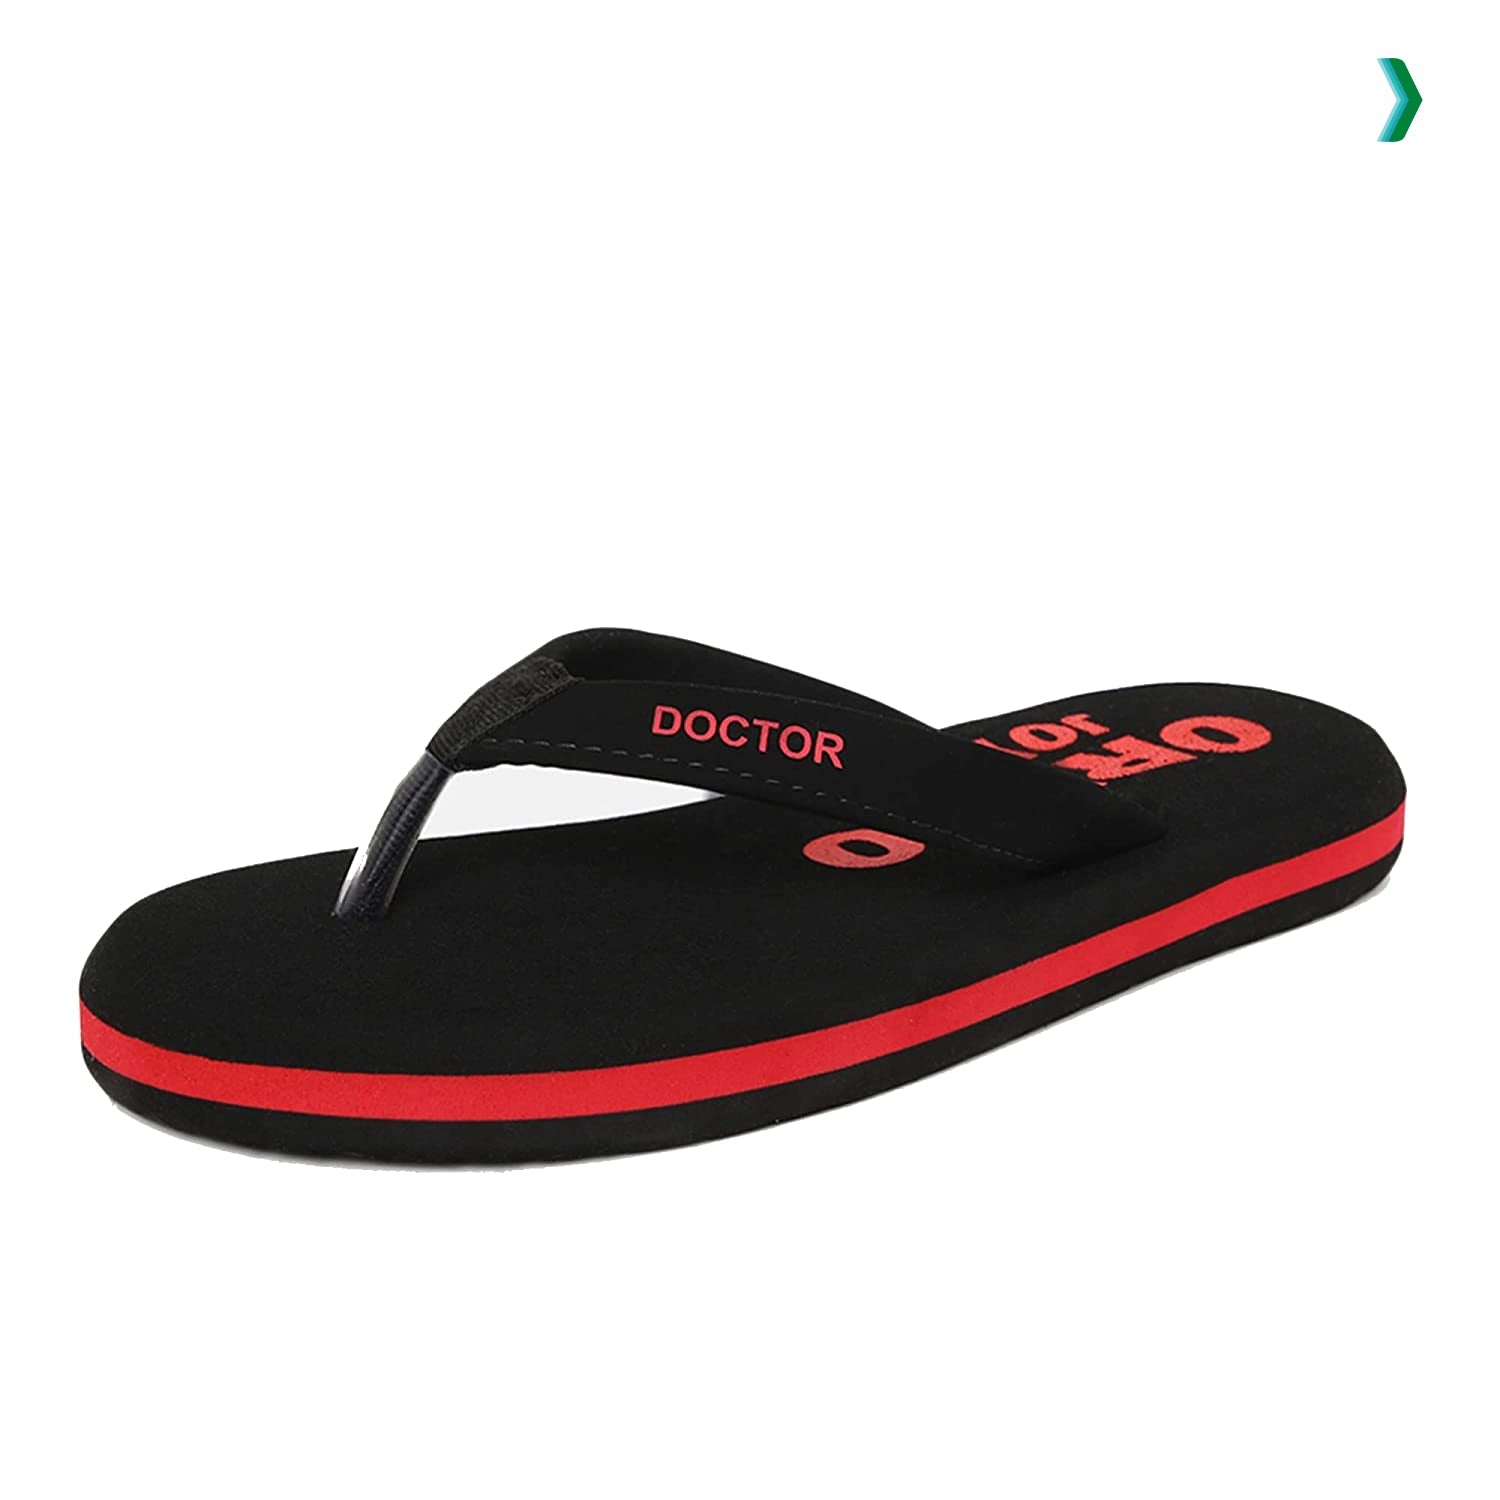 ortho slippers for gents, ortho slippers